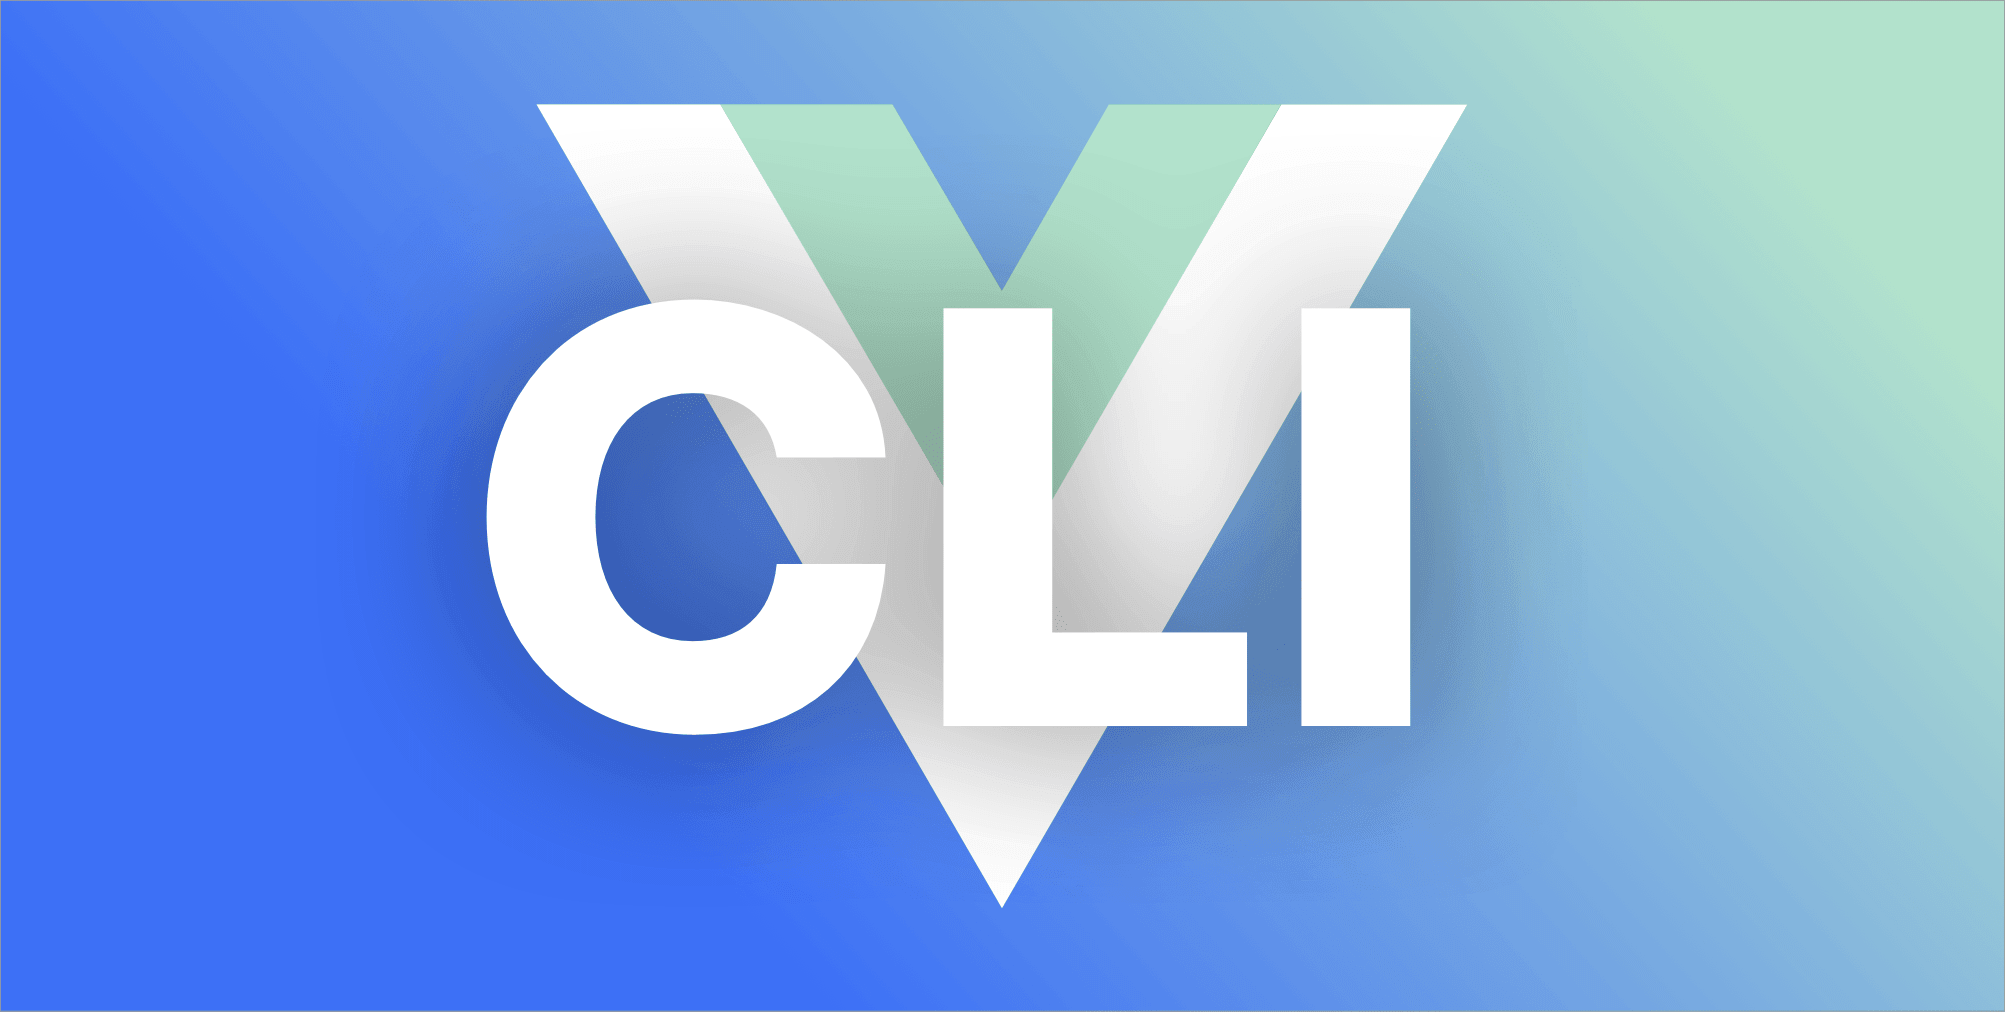 All about the Vue CLI